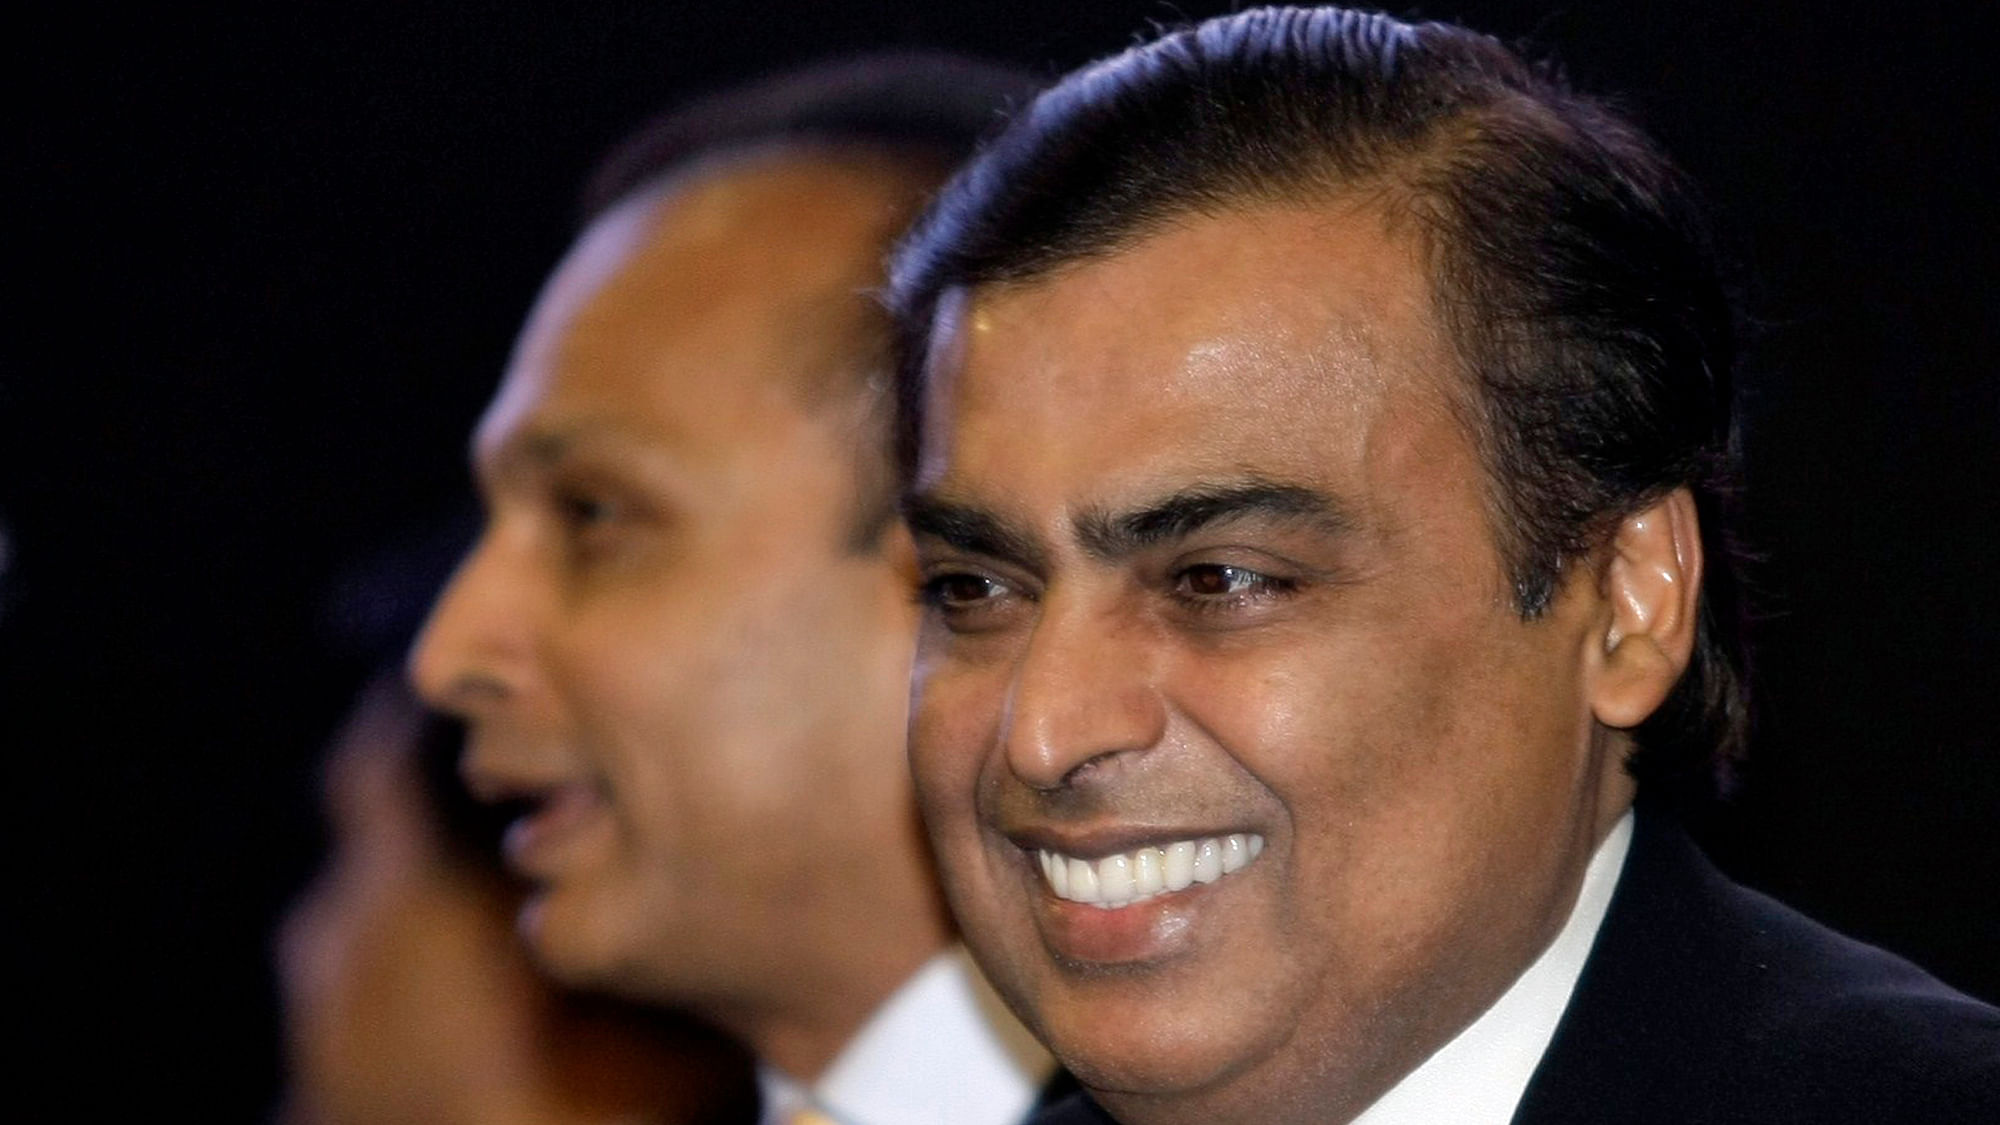 <div class="paragraphs"><p> According to the Bloomberg Billionaires Index, Ambani is now worth $100.6 billion, after his wealth increased by $23.8 billion this year.</p></div>